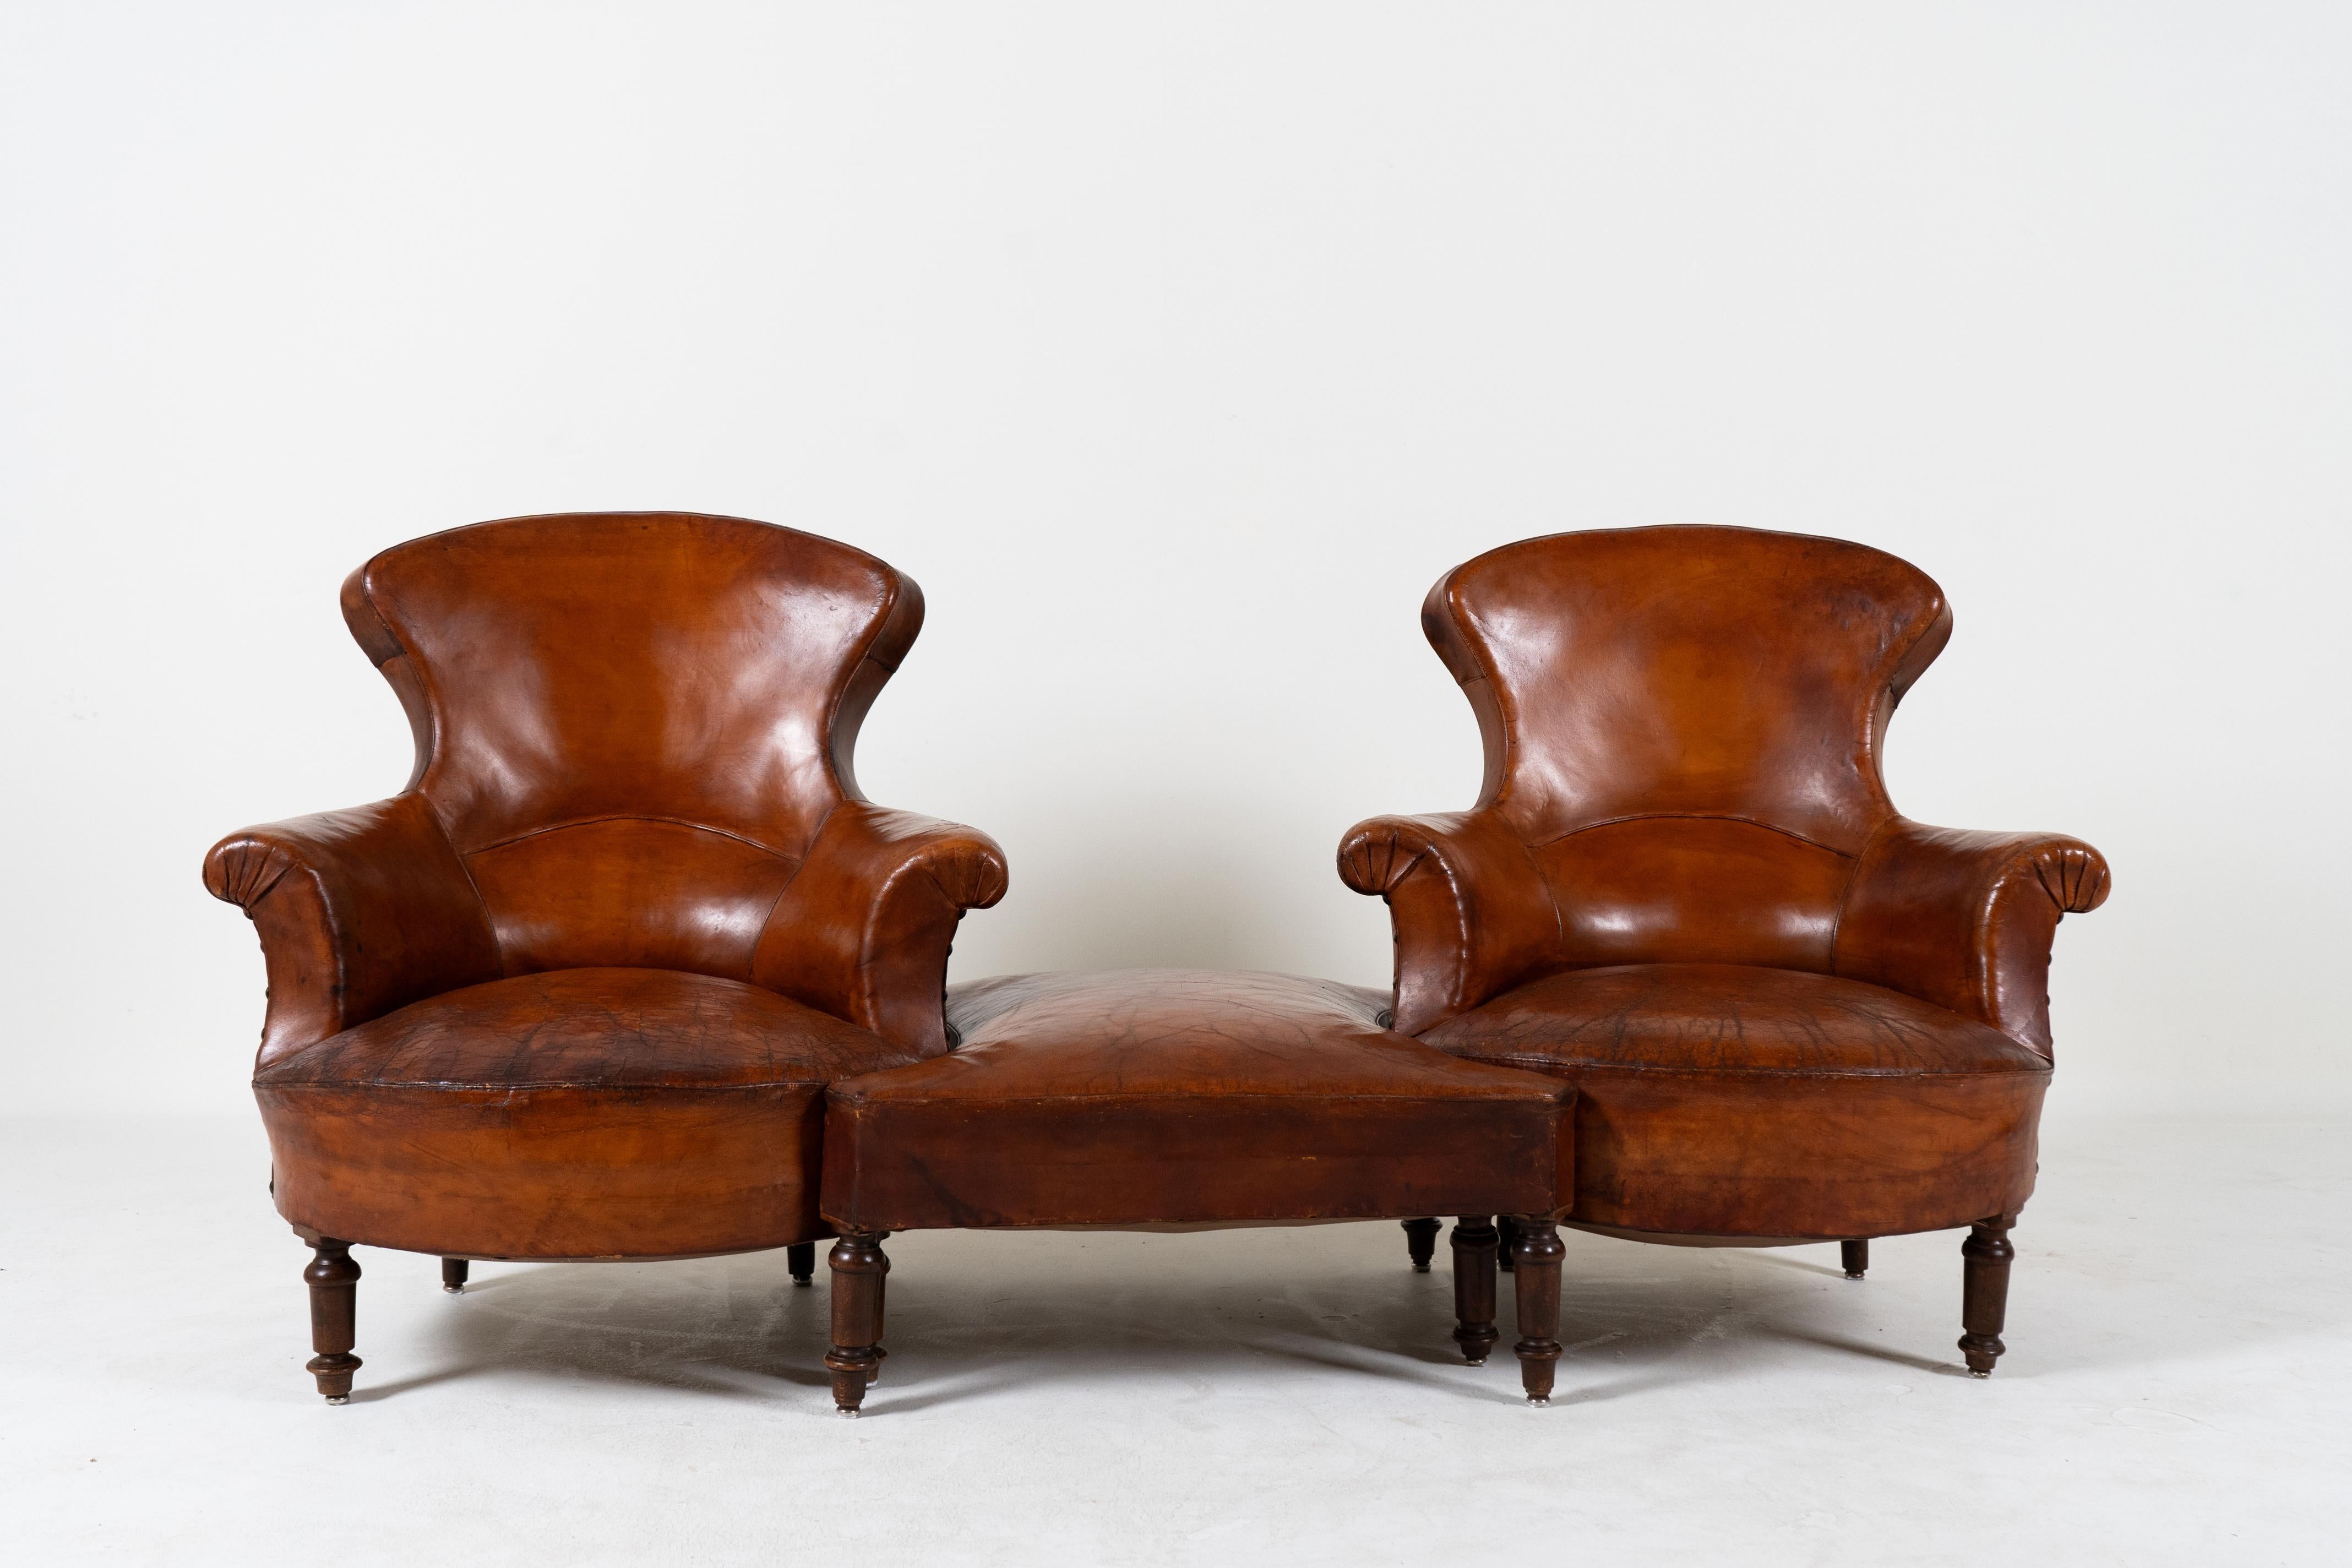 French A Vintage 3 Piece Set of Leather Chairs with a Stool, France c.1940